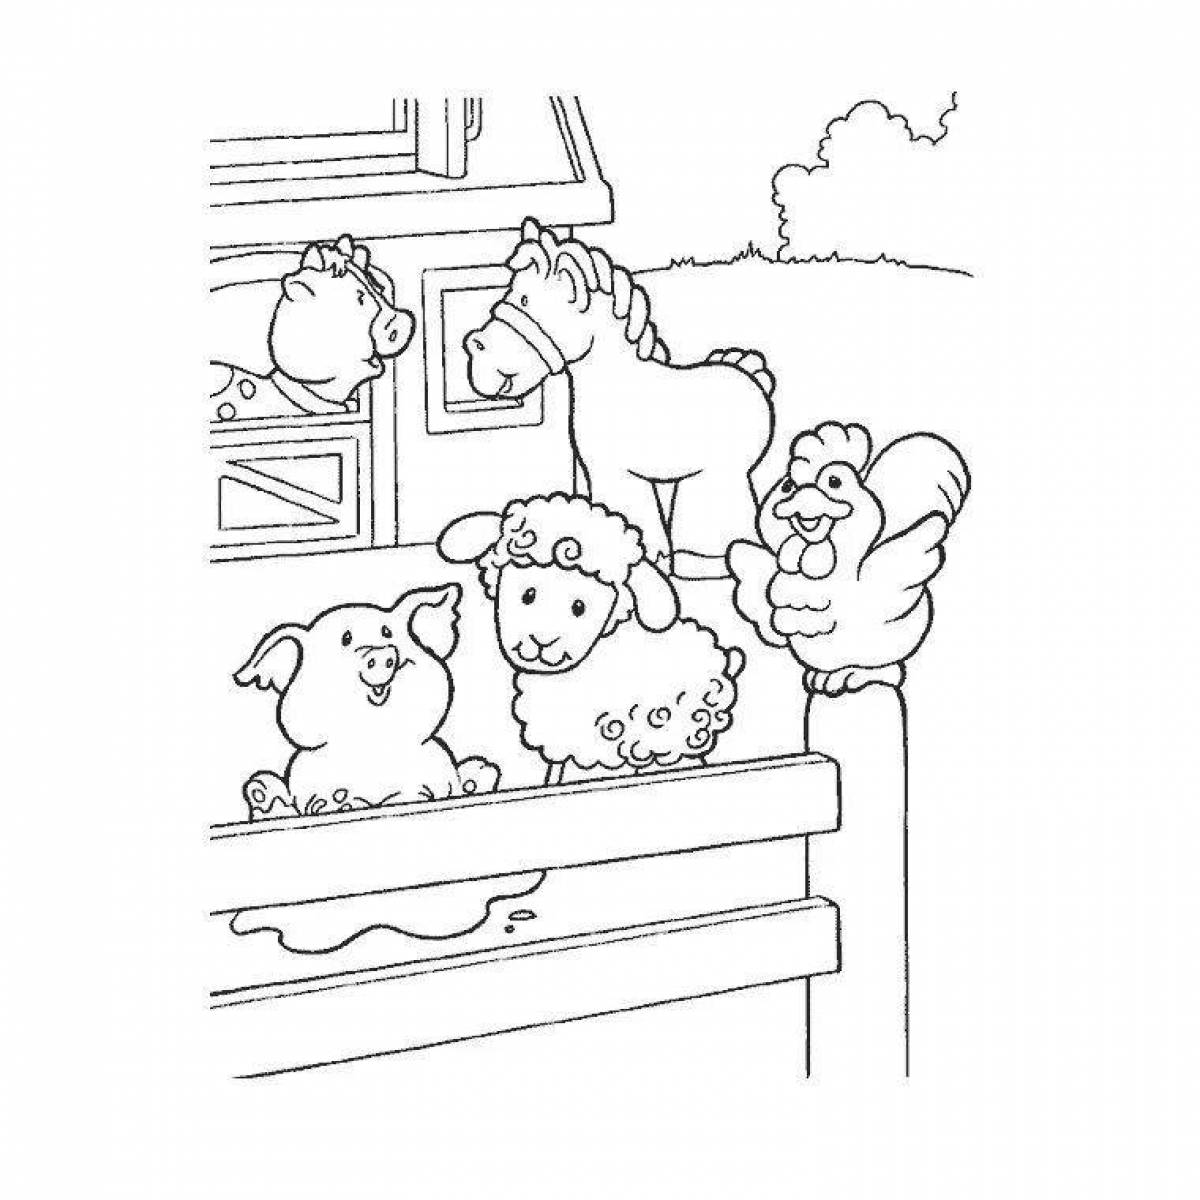 Coloring page gorgeous winter animal hut